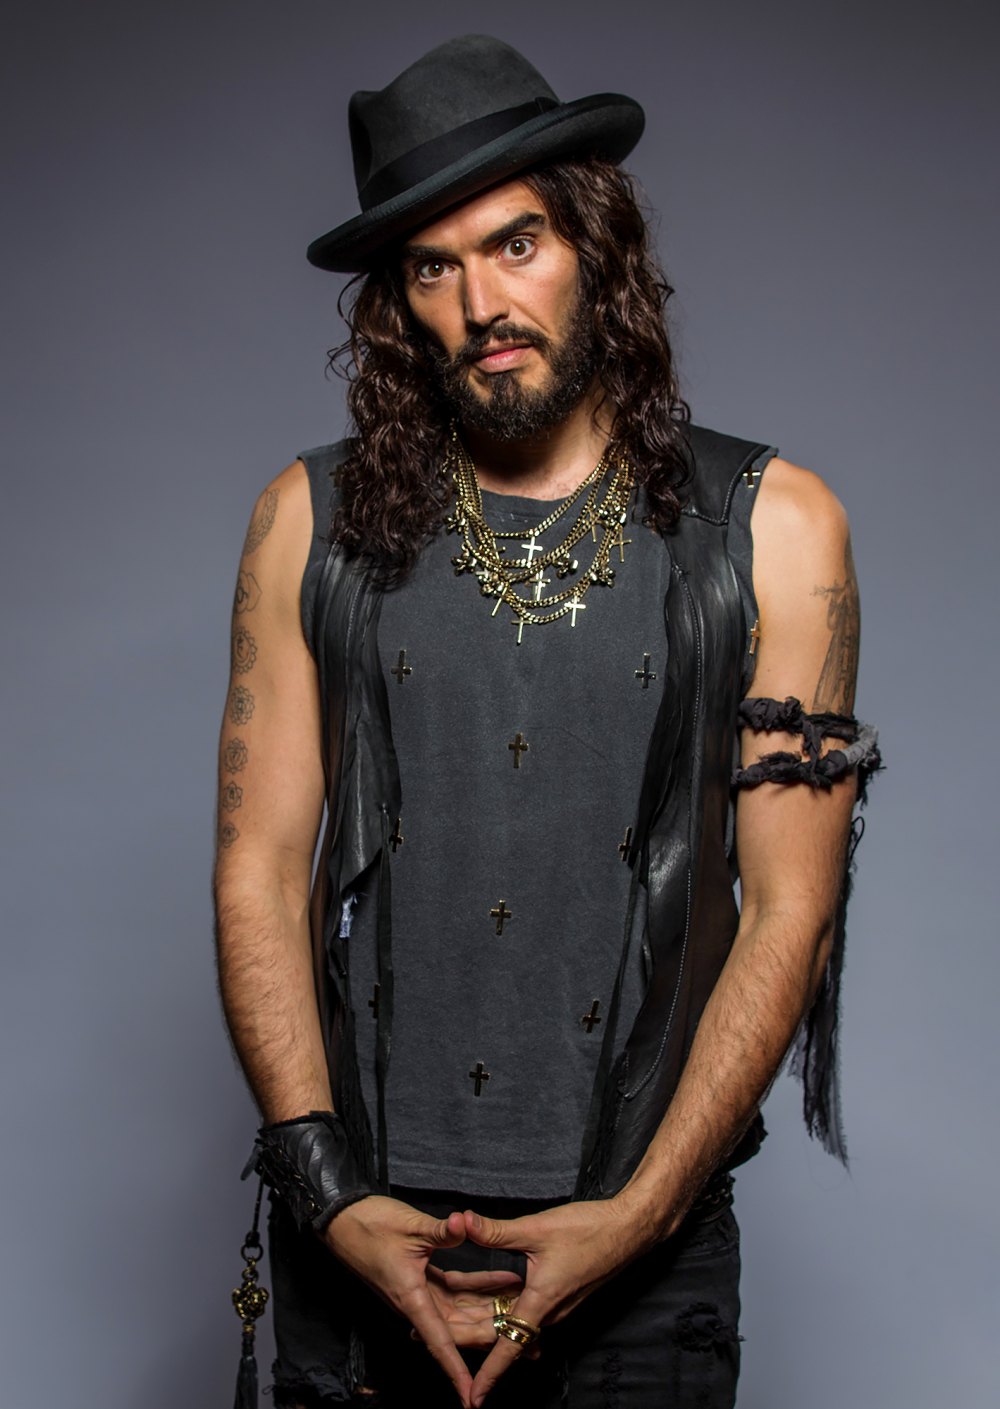 U.K. Police Open Sex Crimes Investigation After String of Allegations Against Russell Brand